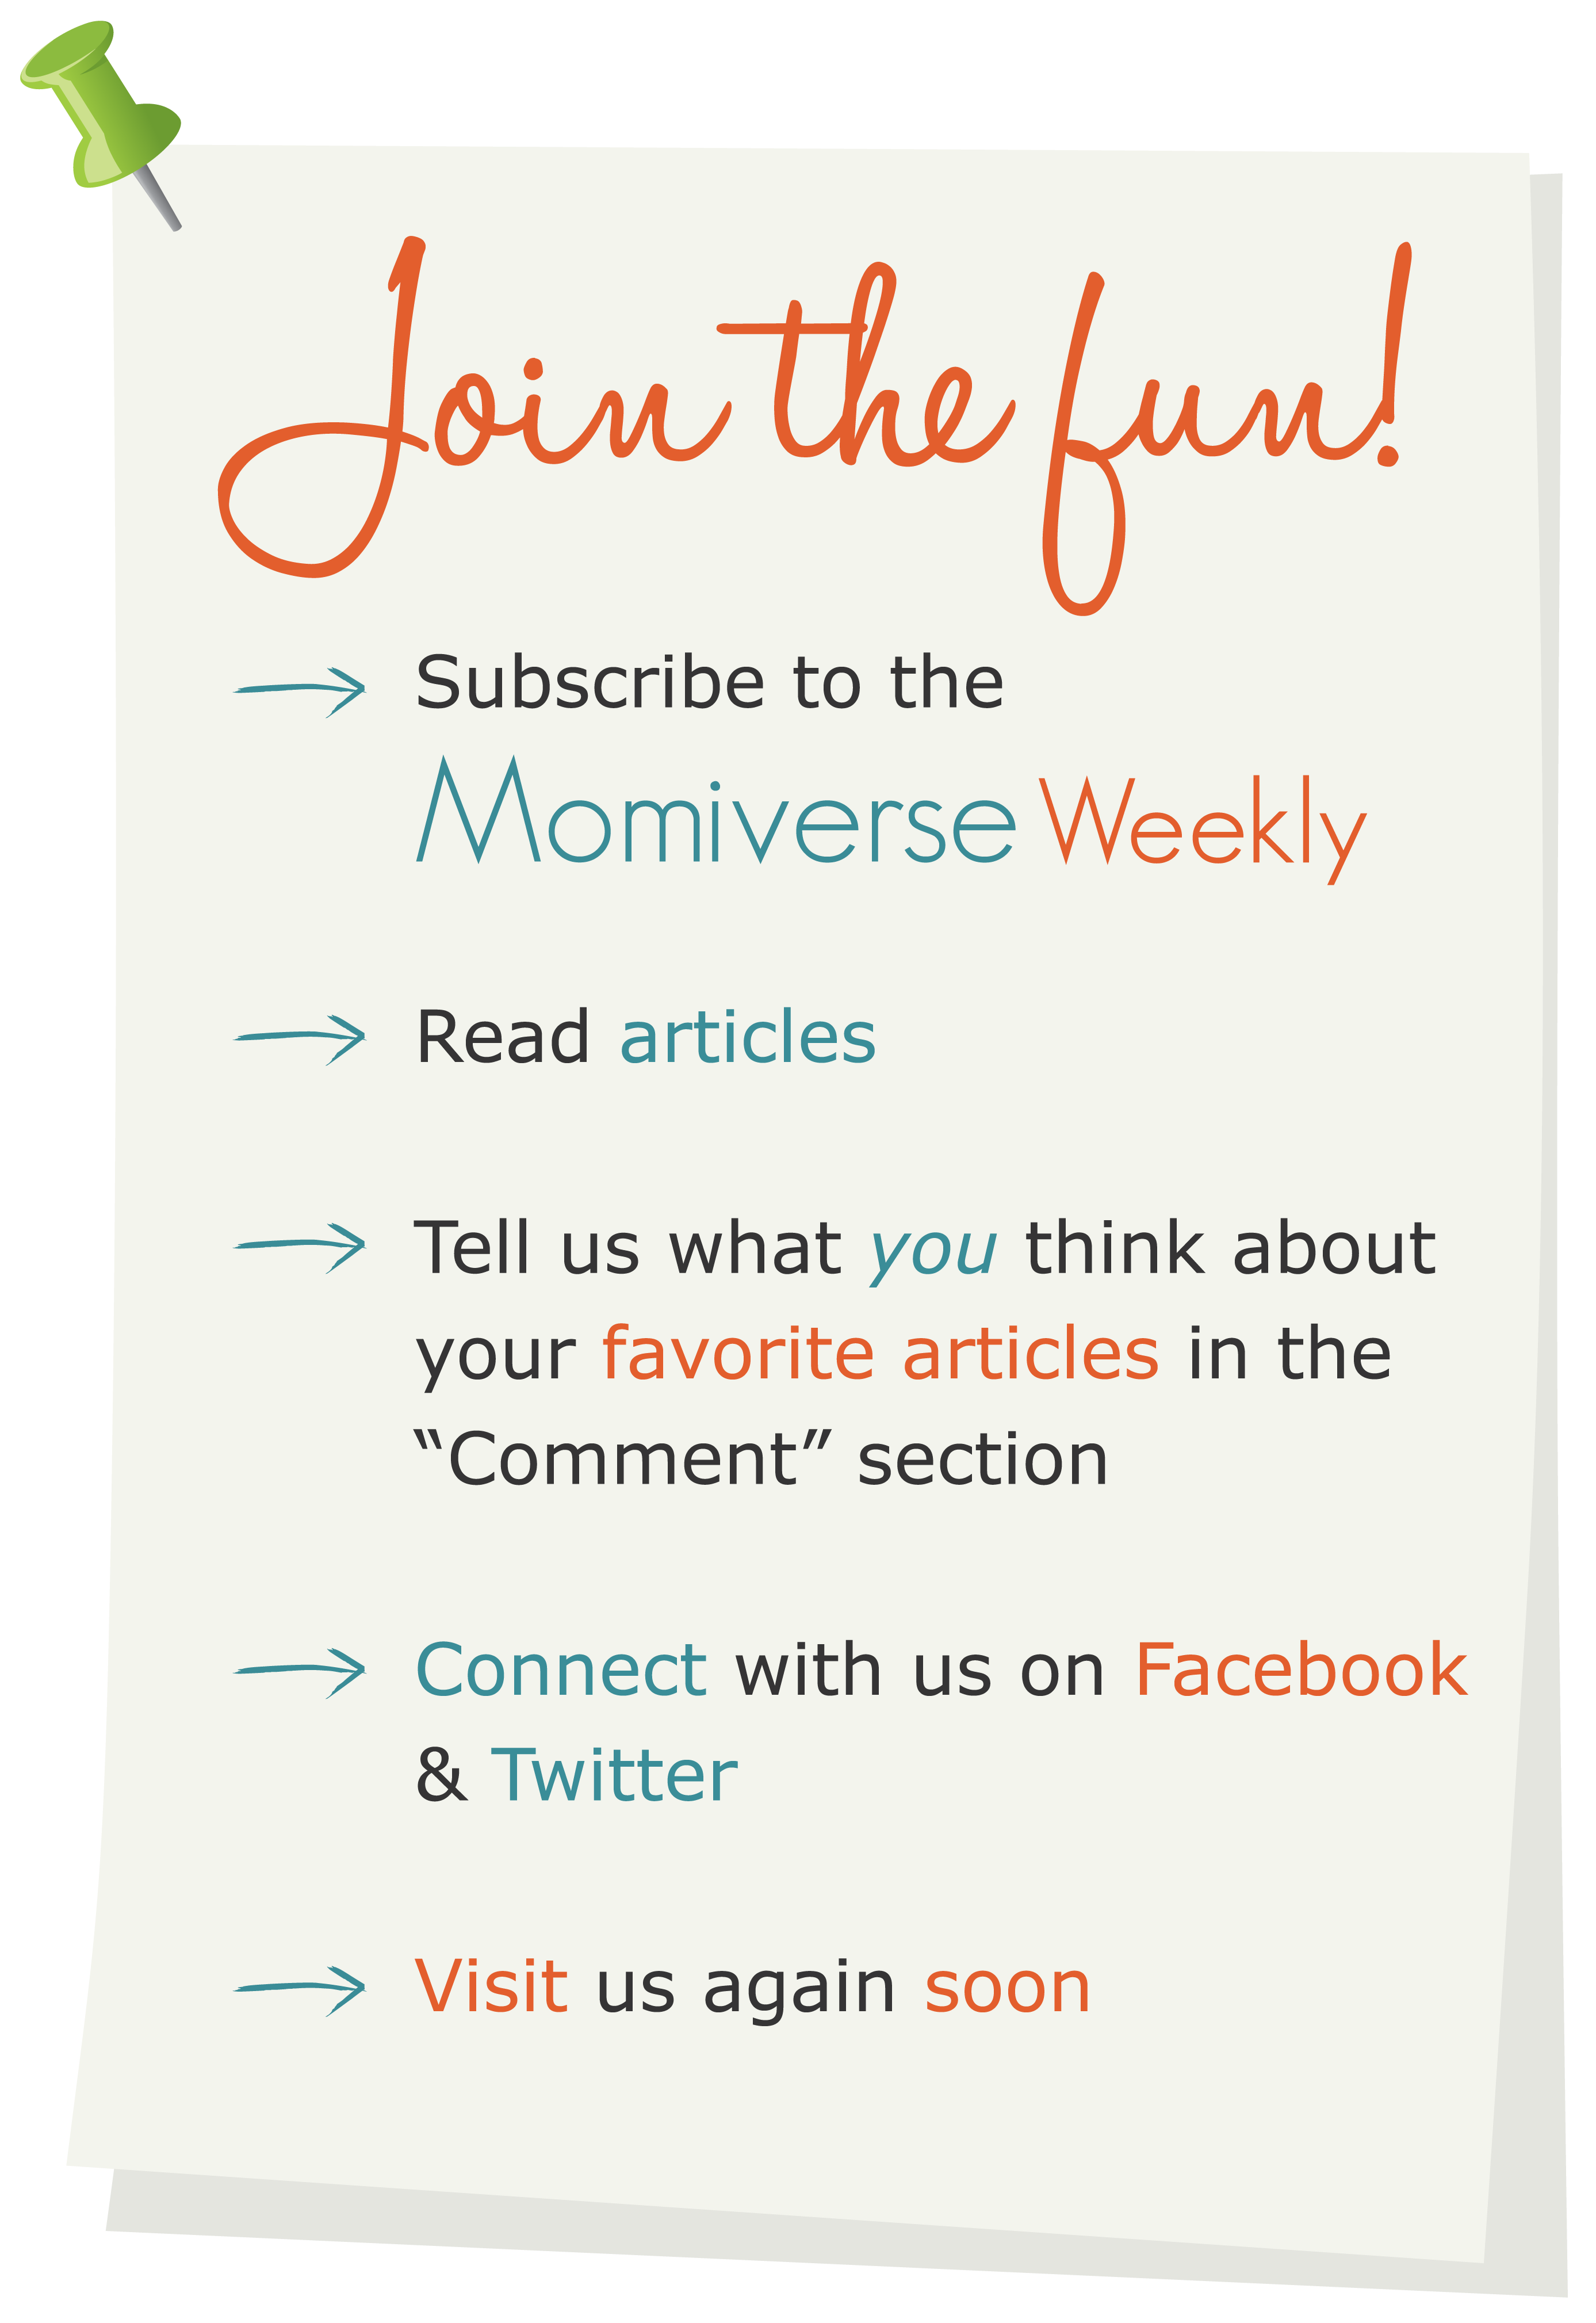 Join the fun at the Momiverse